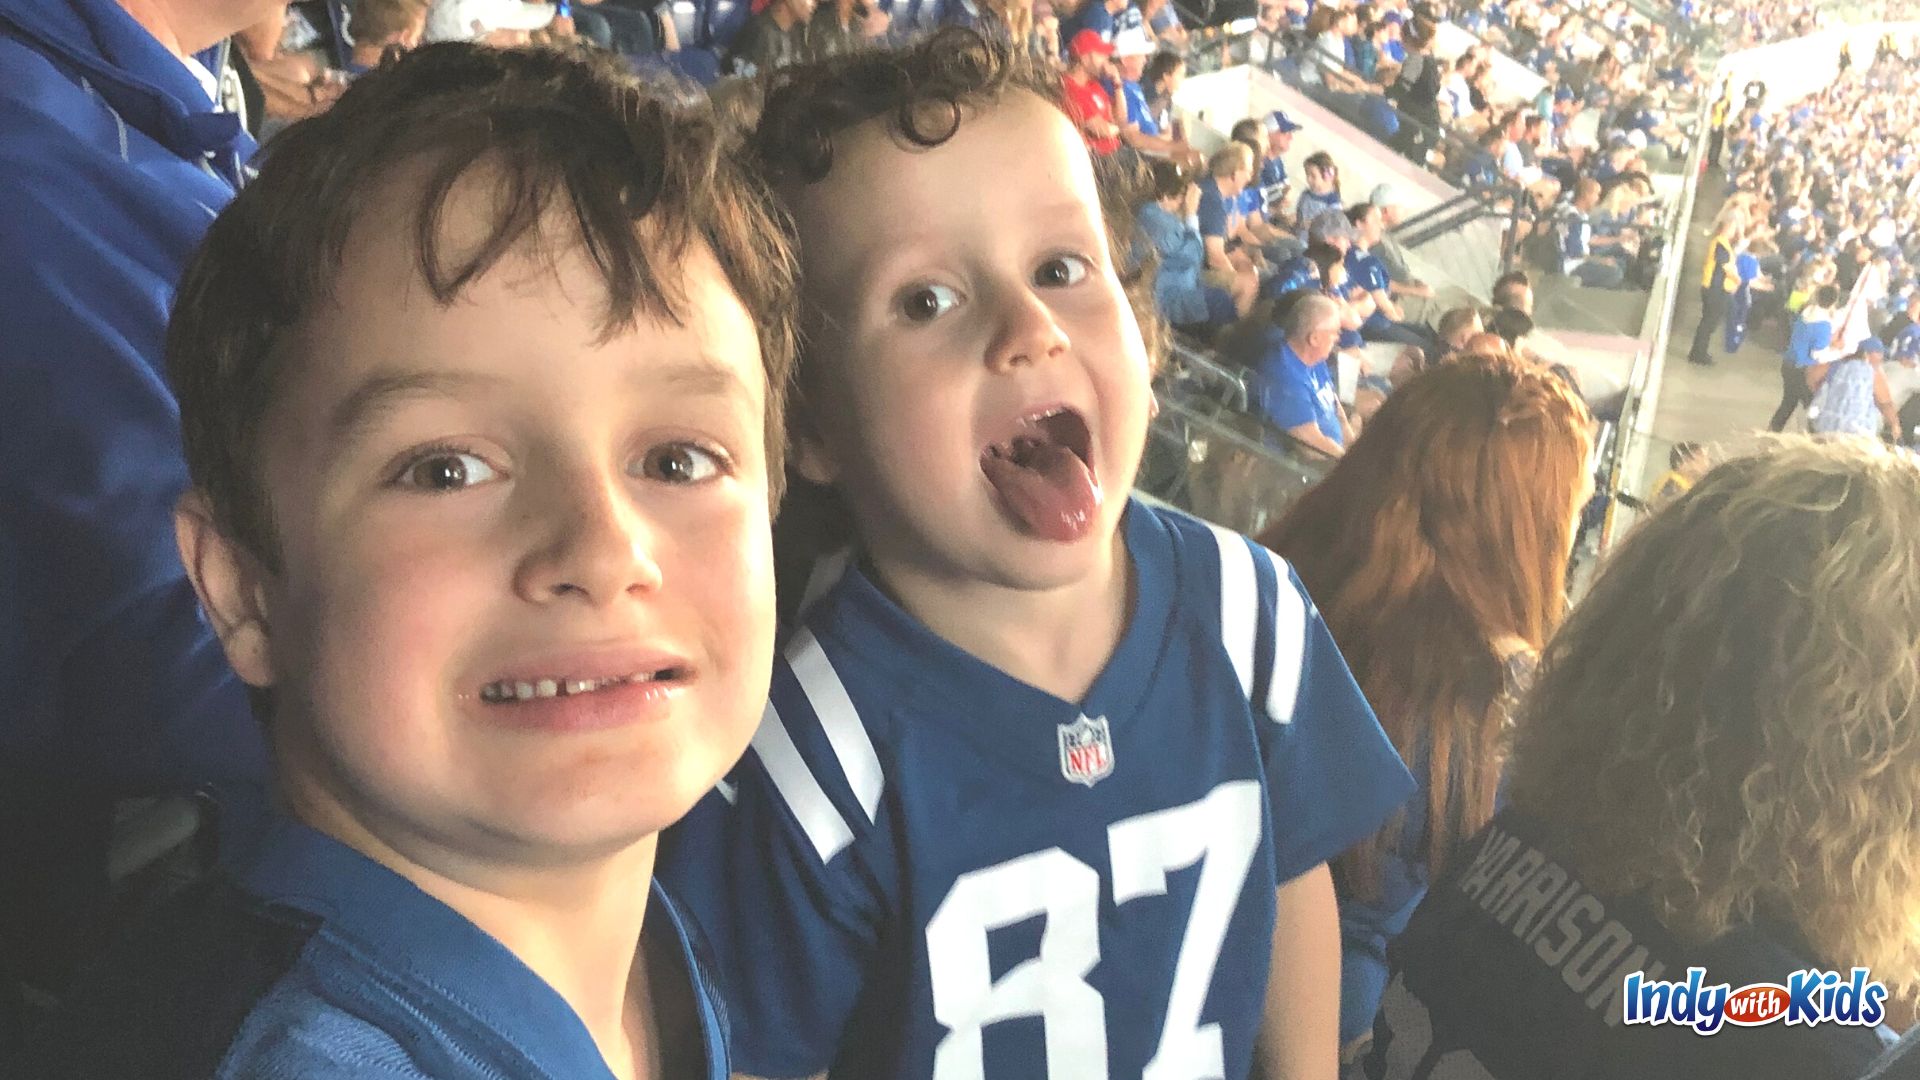 Football Games with Kids: The Indianapolis Colts offer family-friendly benefits.